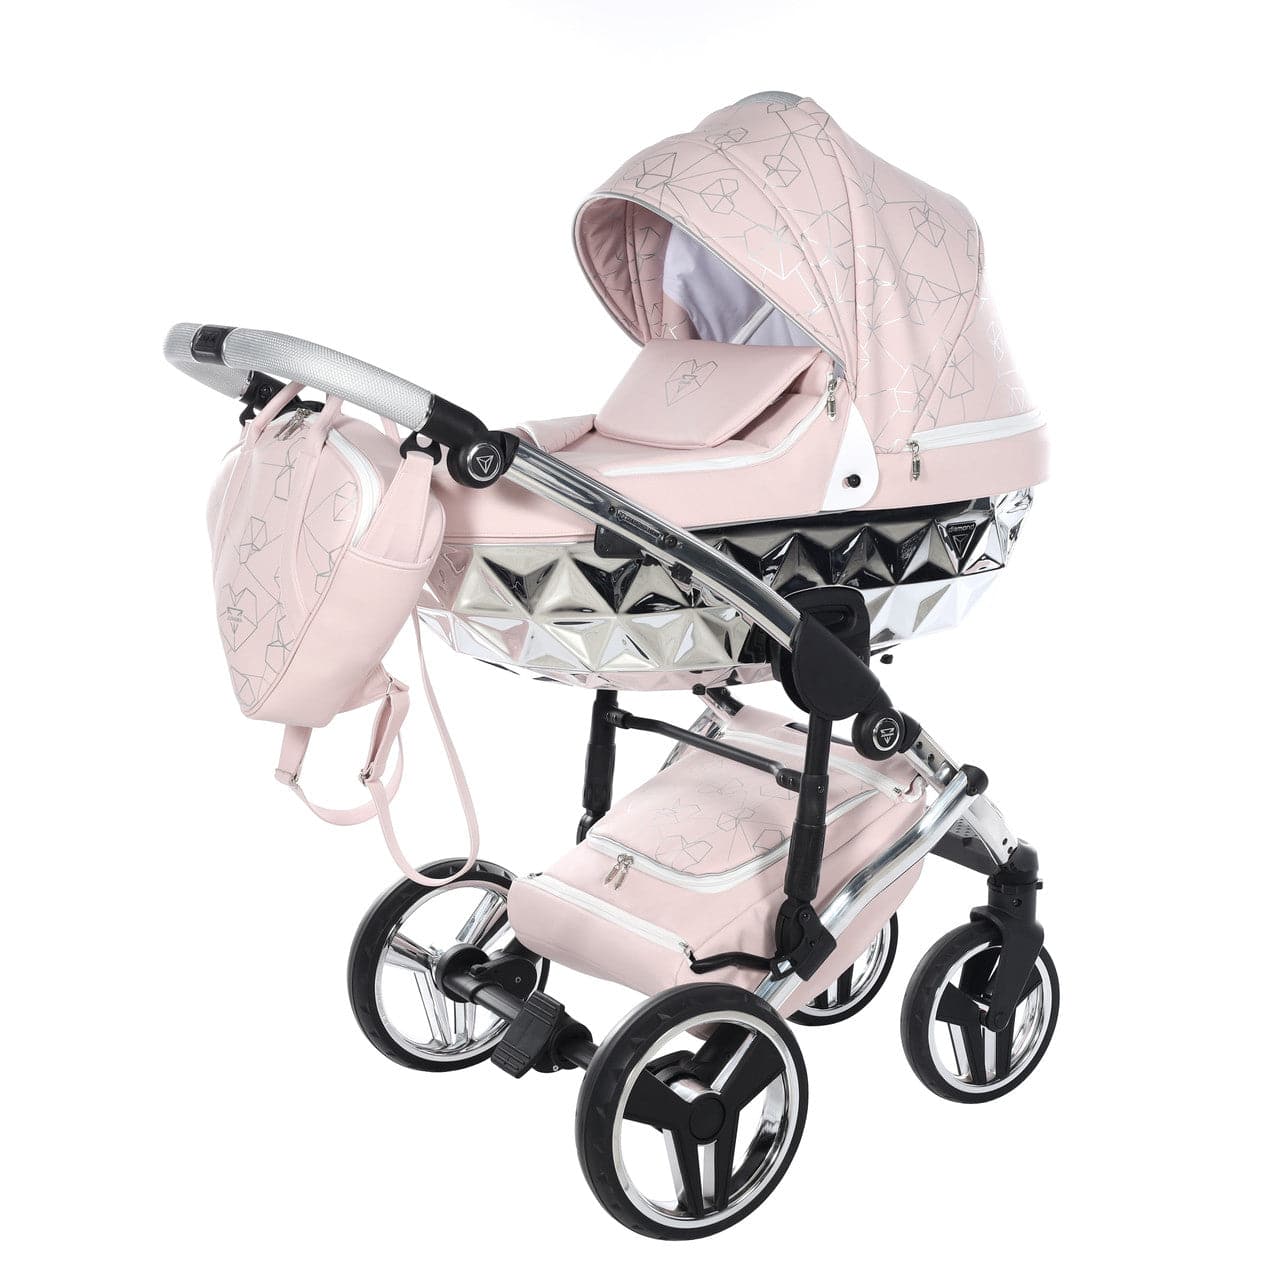 Junama Heart 2 In 1 Pram - Pink - For Your Little One